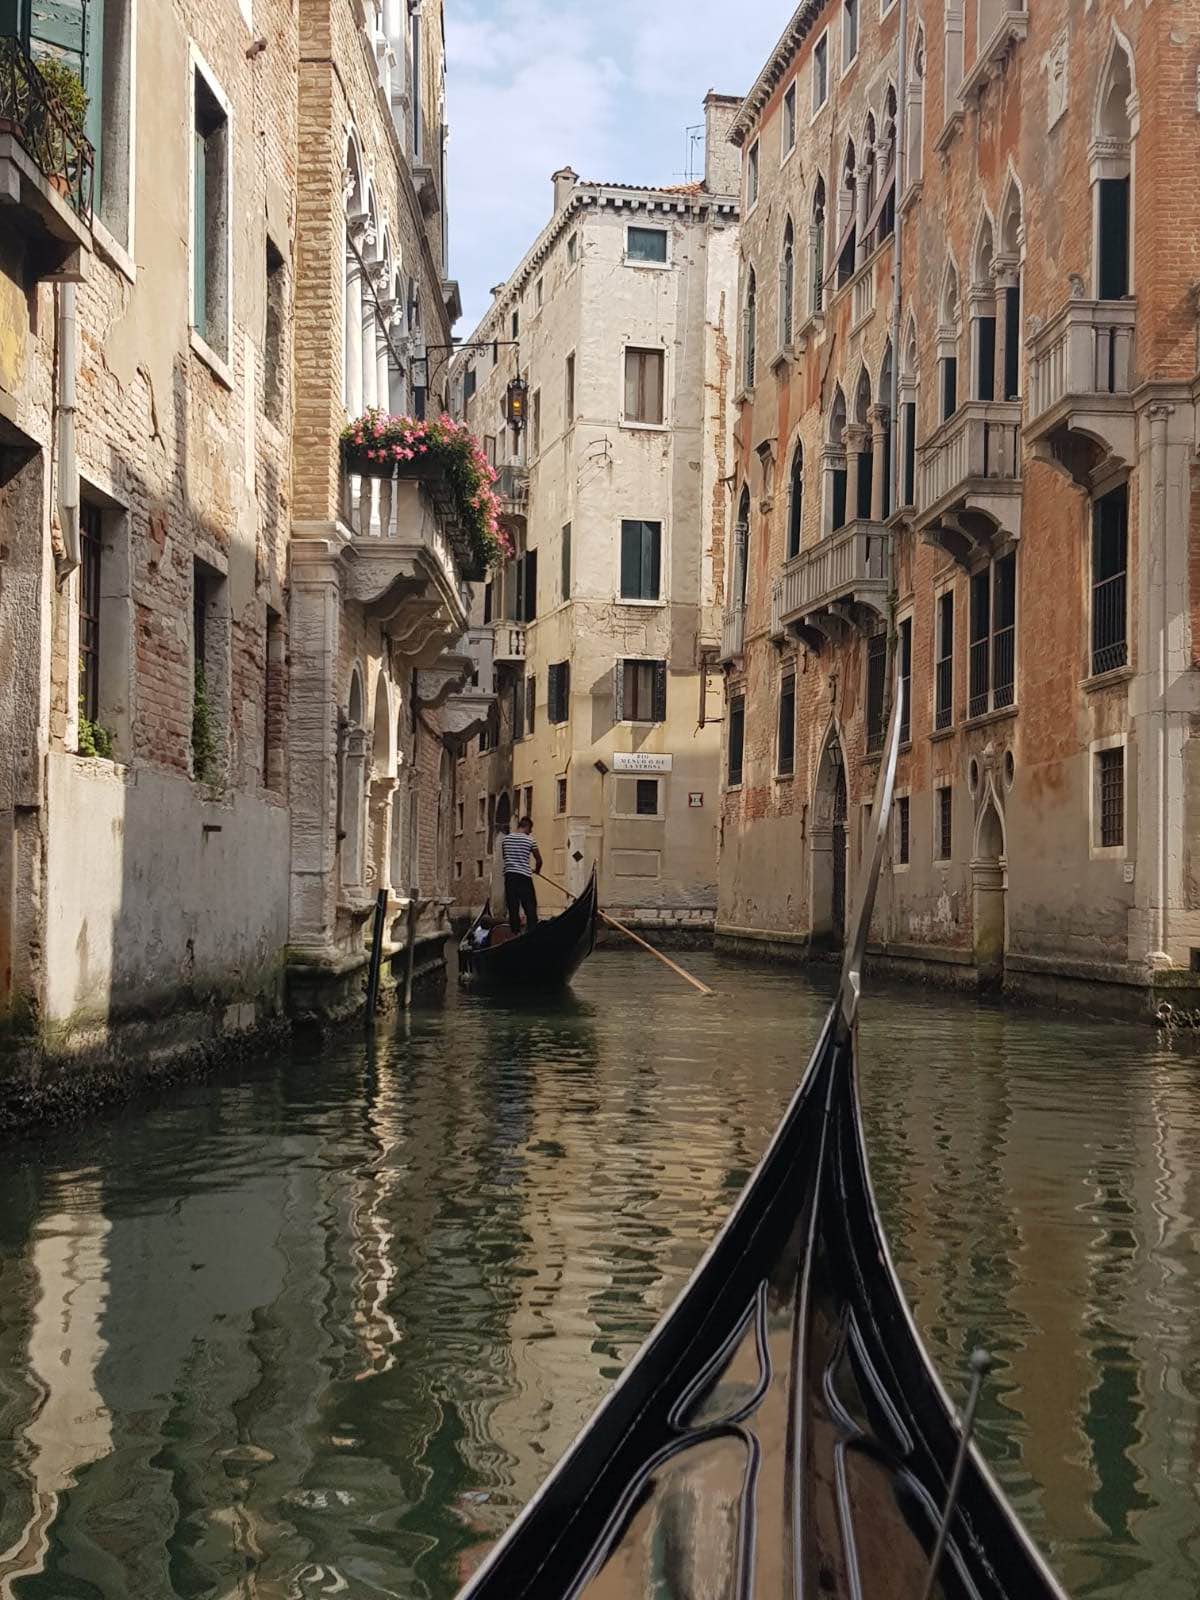 View of Venice from a gondola